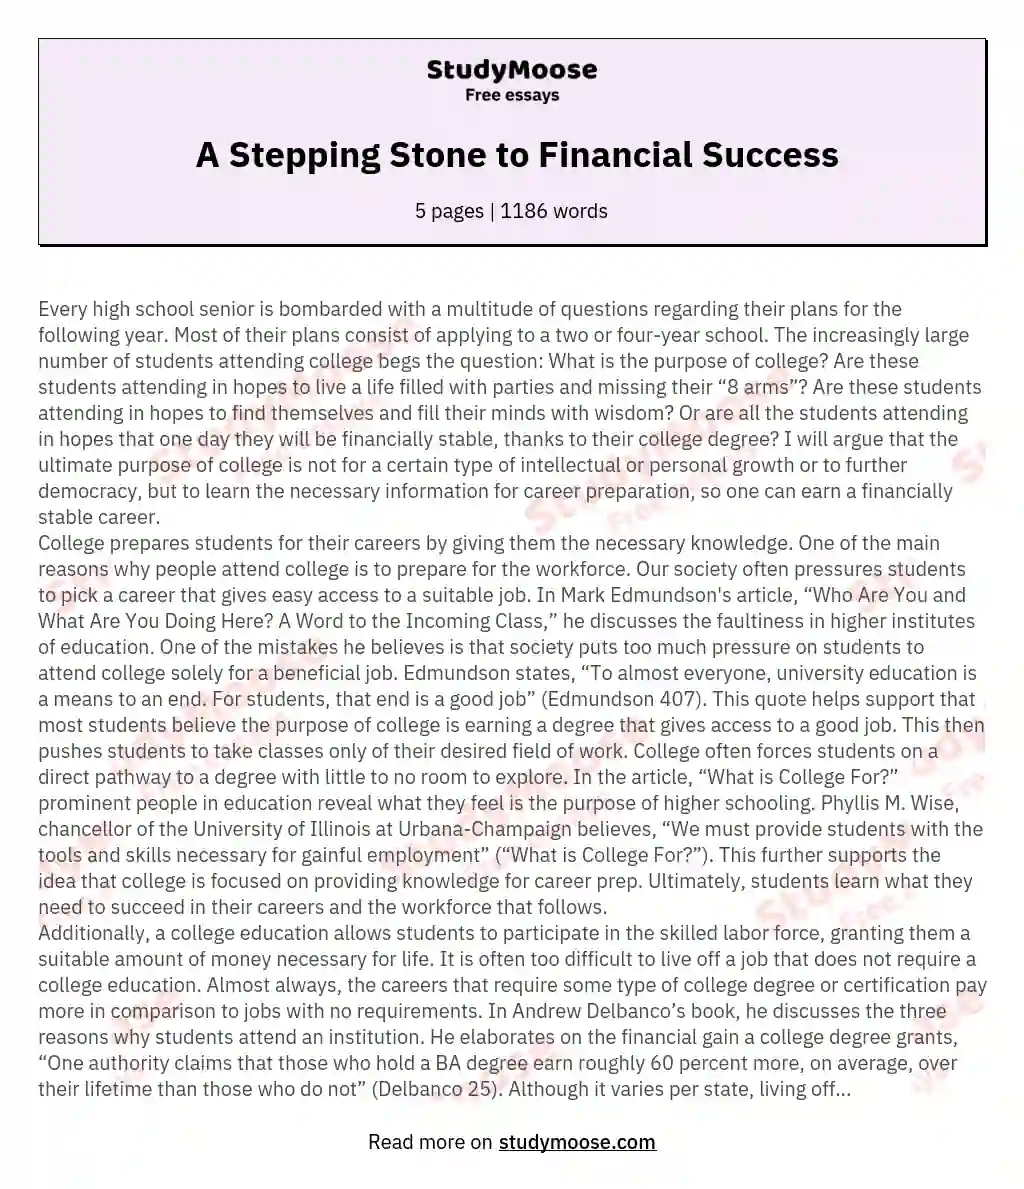  A Stepping Stone to Financial Success essay